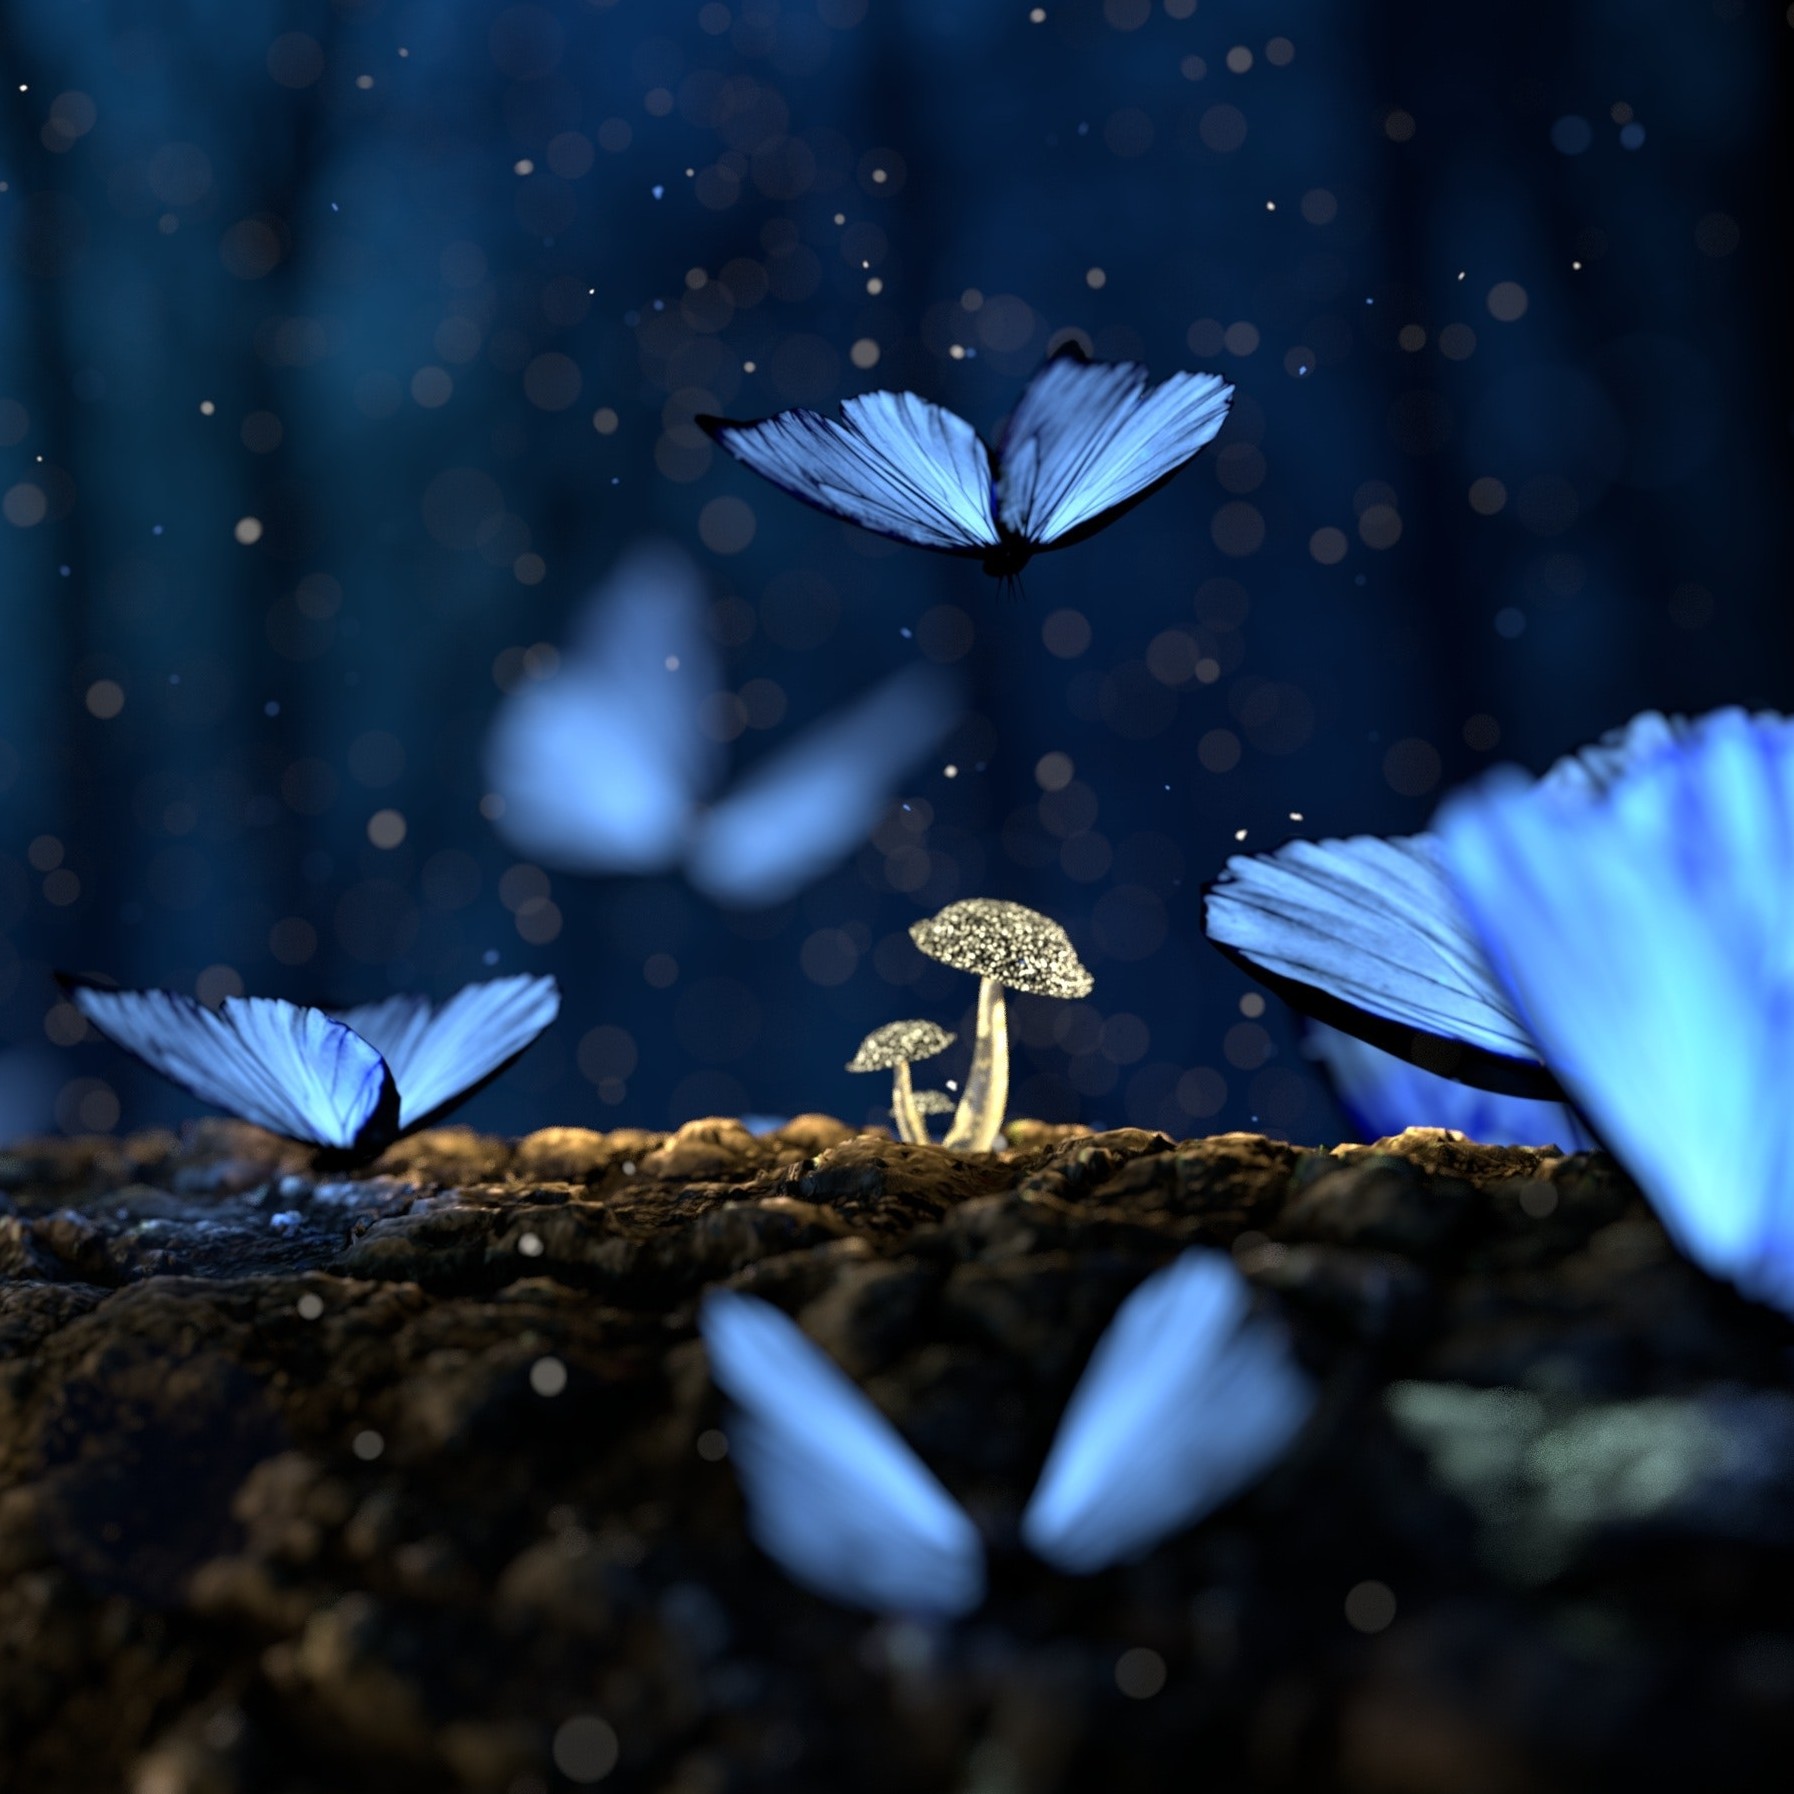 Blue butterflys and mushrooms - Edited